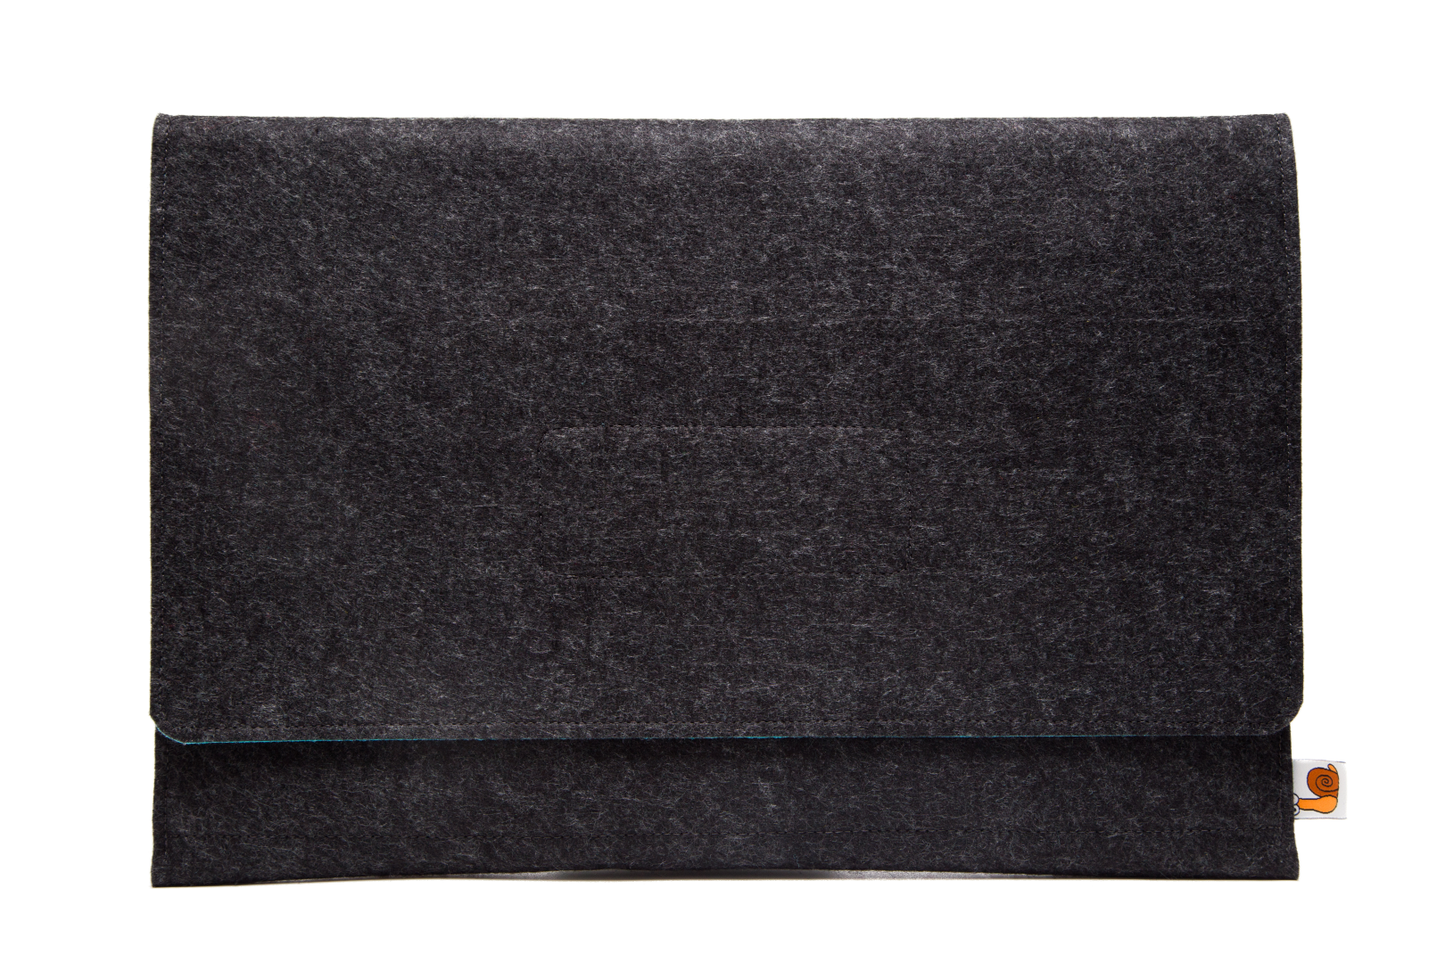 Handmade MacBook Cover with Accessories Pocket: Charcoal & Turquoise